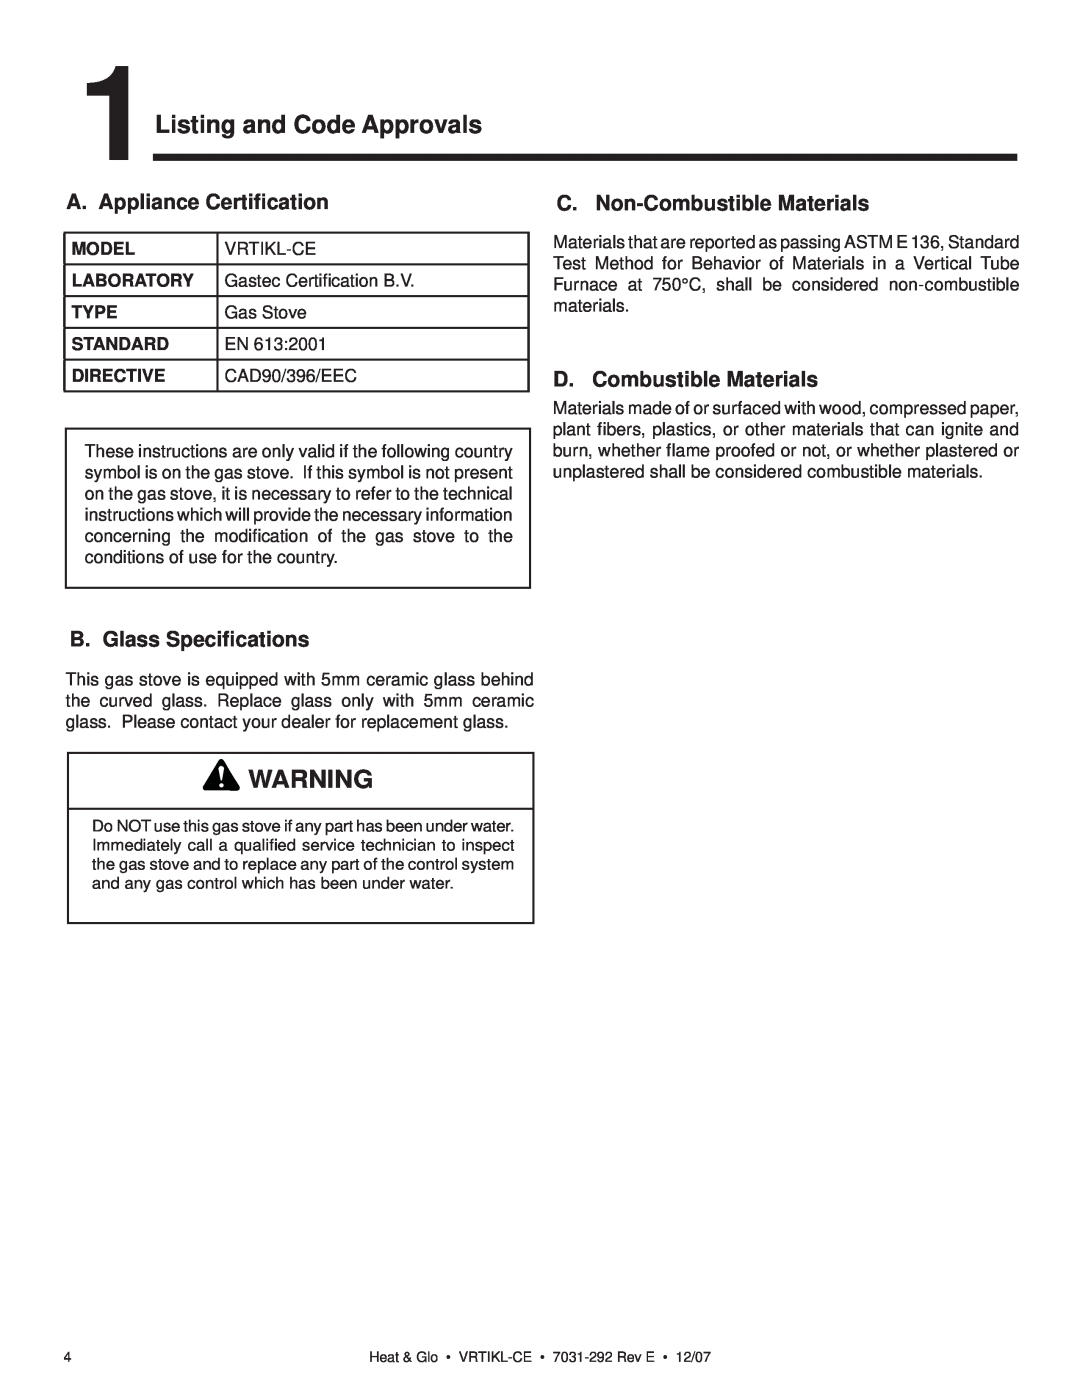 Hearth and Home Technologies VRT-GY-B-CE 1Listing and Code Approvals, A. Appliance Certiﬁcation, D. Combustible Materials 